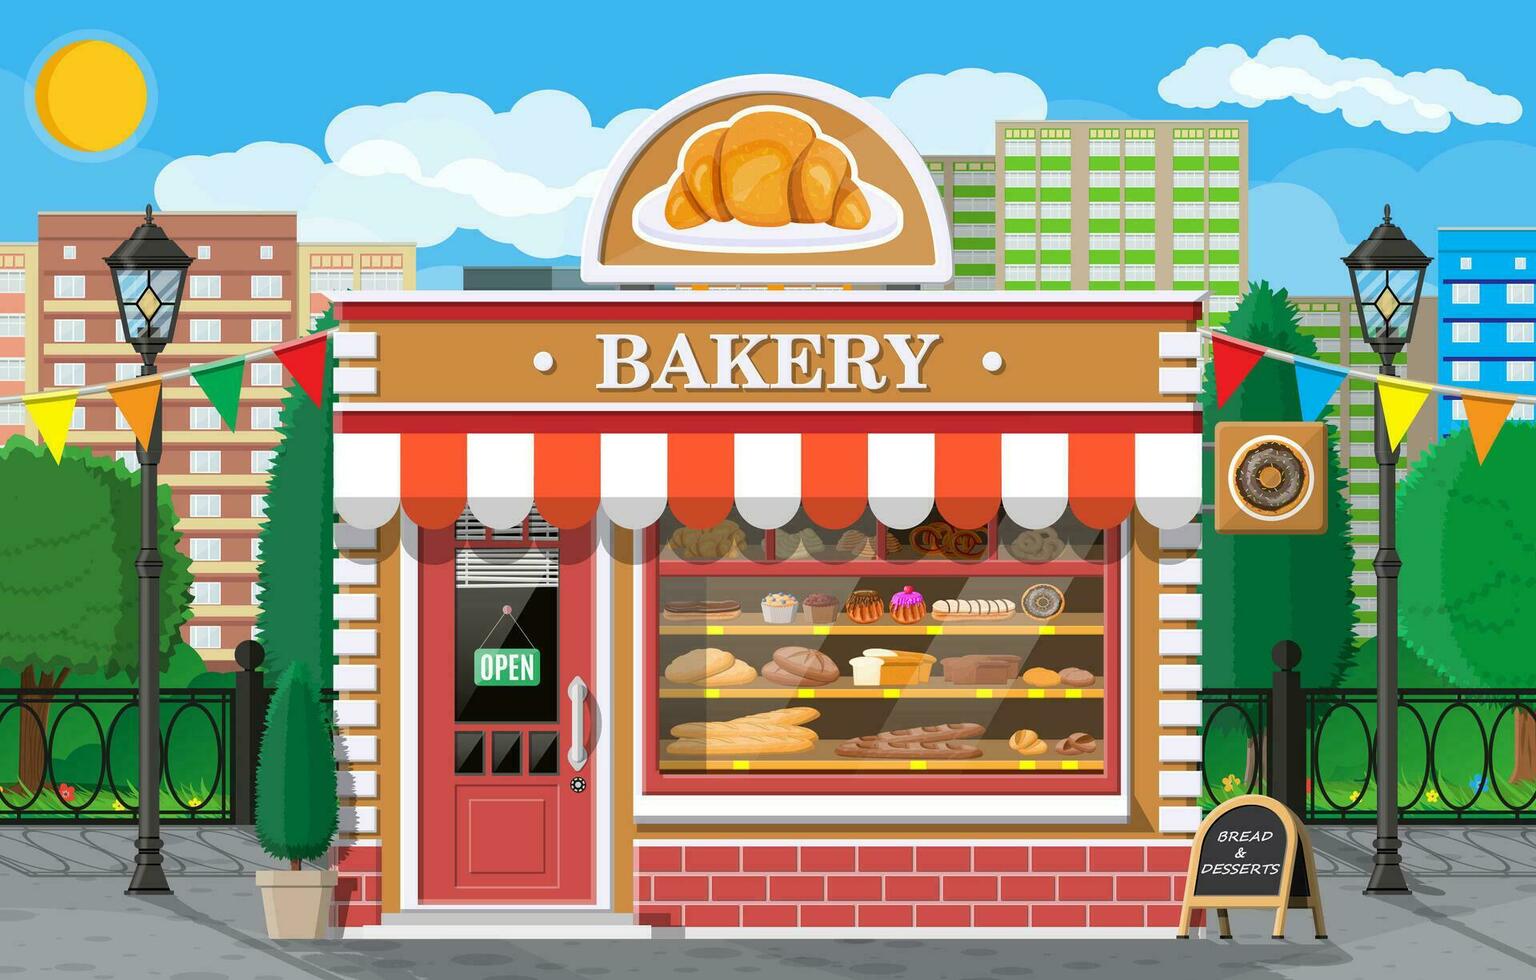 Bakery shop building facade with signboard. Baking store, cafe, bread, pastry and dessert shop. Showcases with bread, cake. City park, street lamp, trees. Market, supermarket. Flat vector illustration